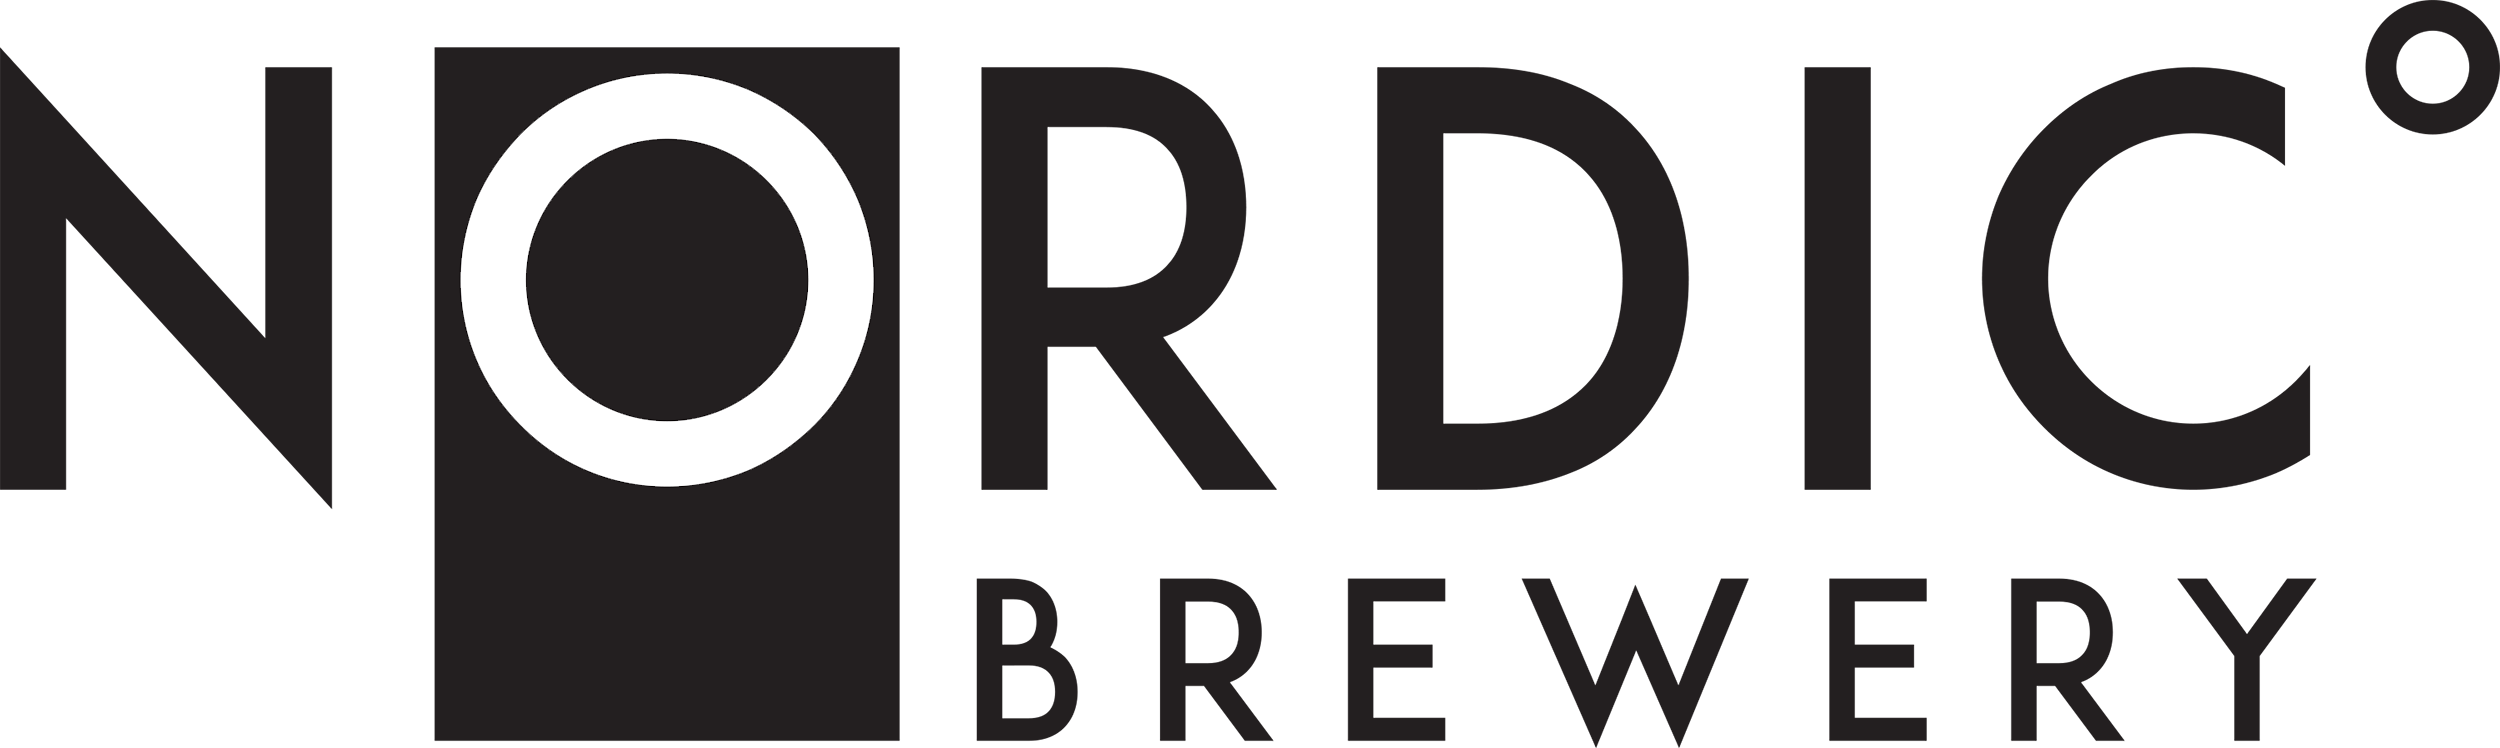 Nordic Brewery